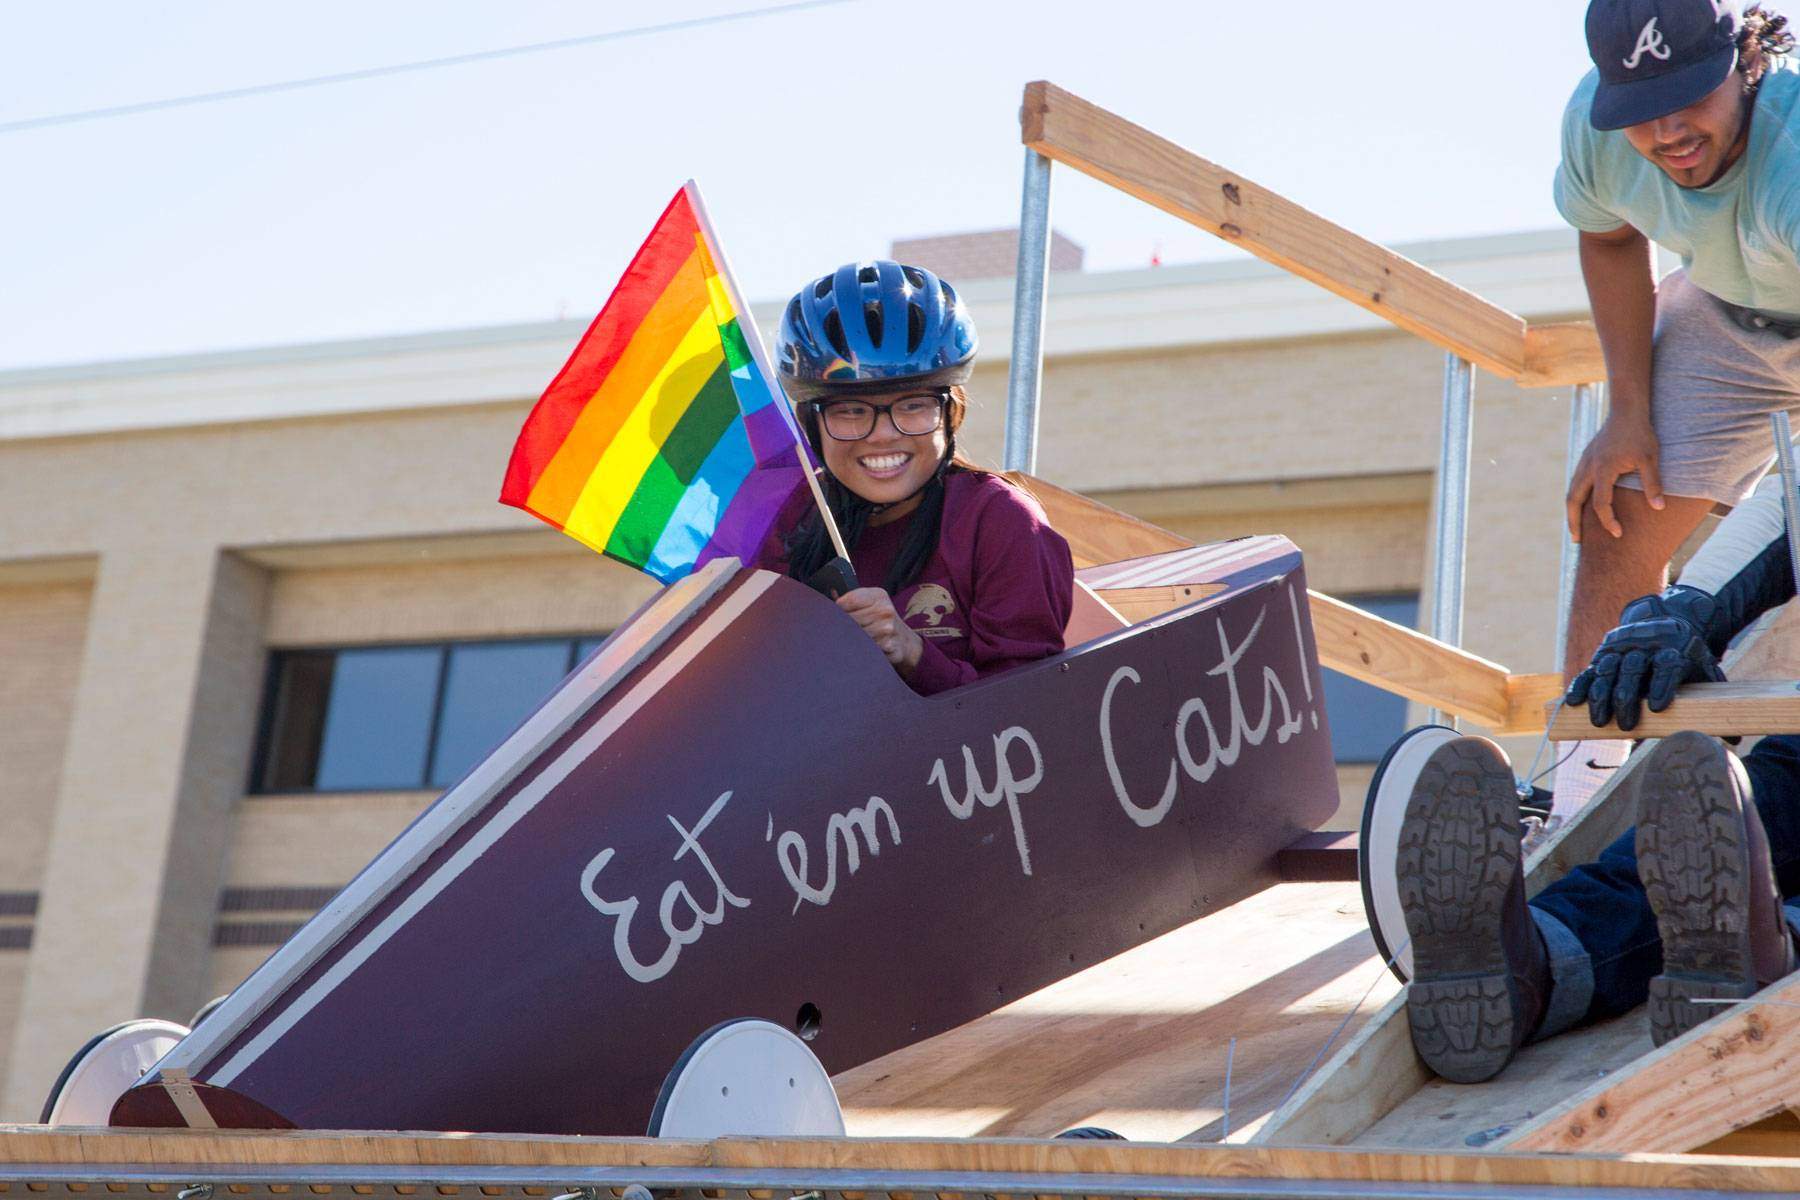 soap box derby contestant holding a pride flag